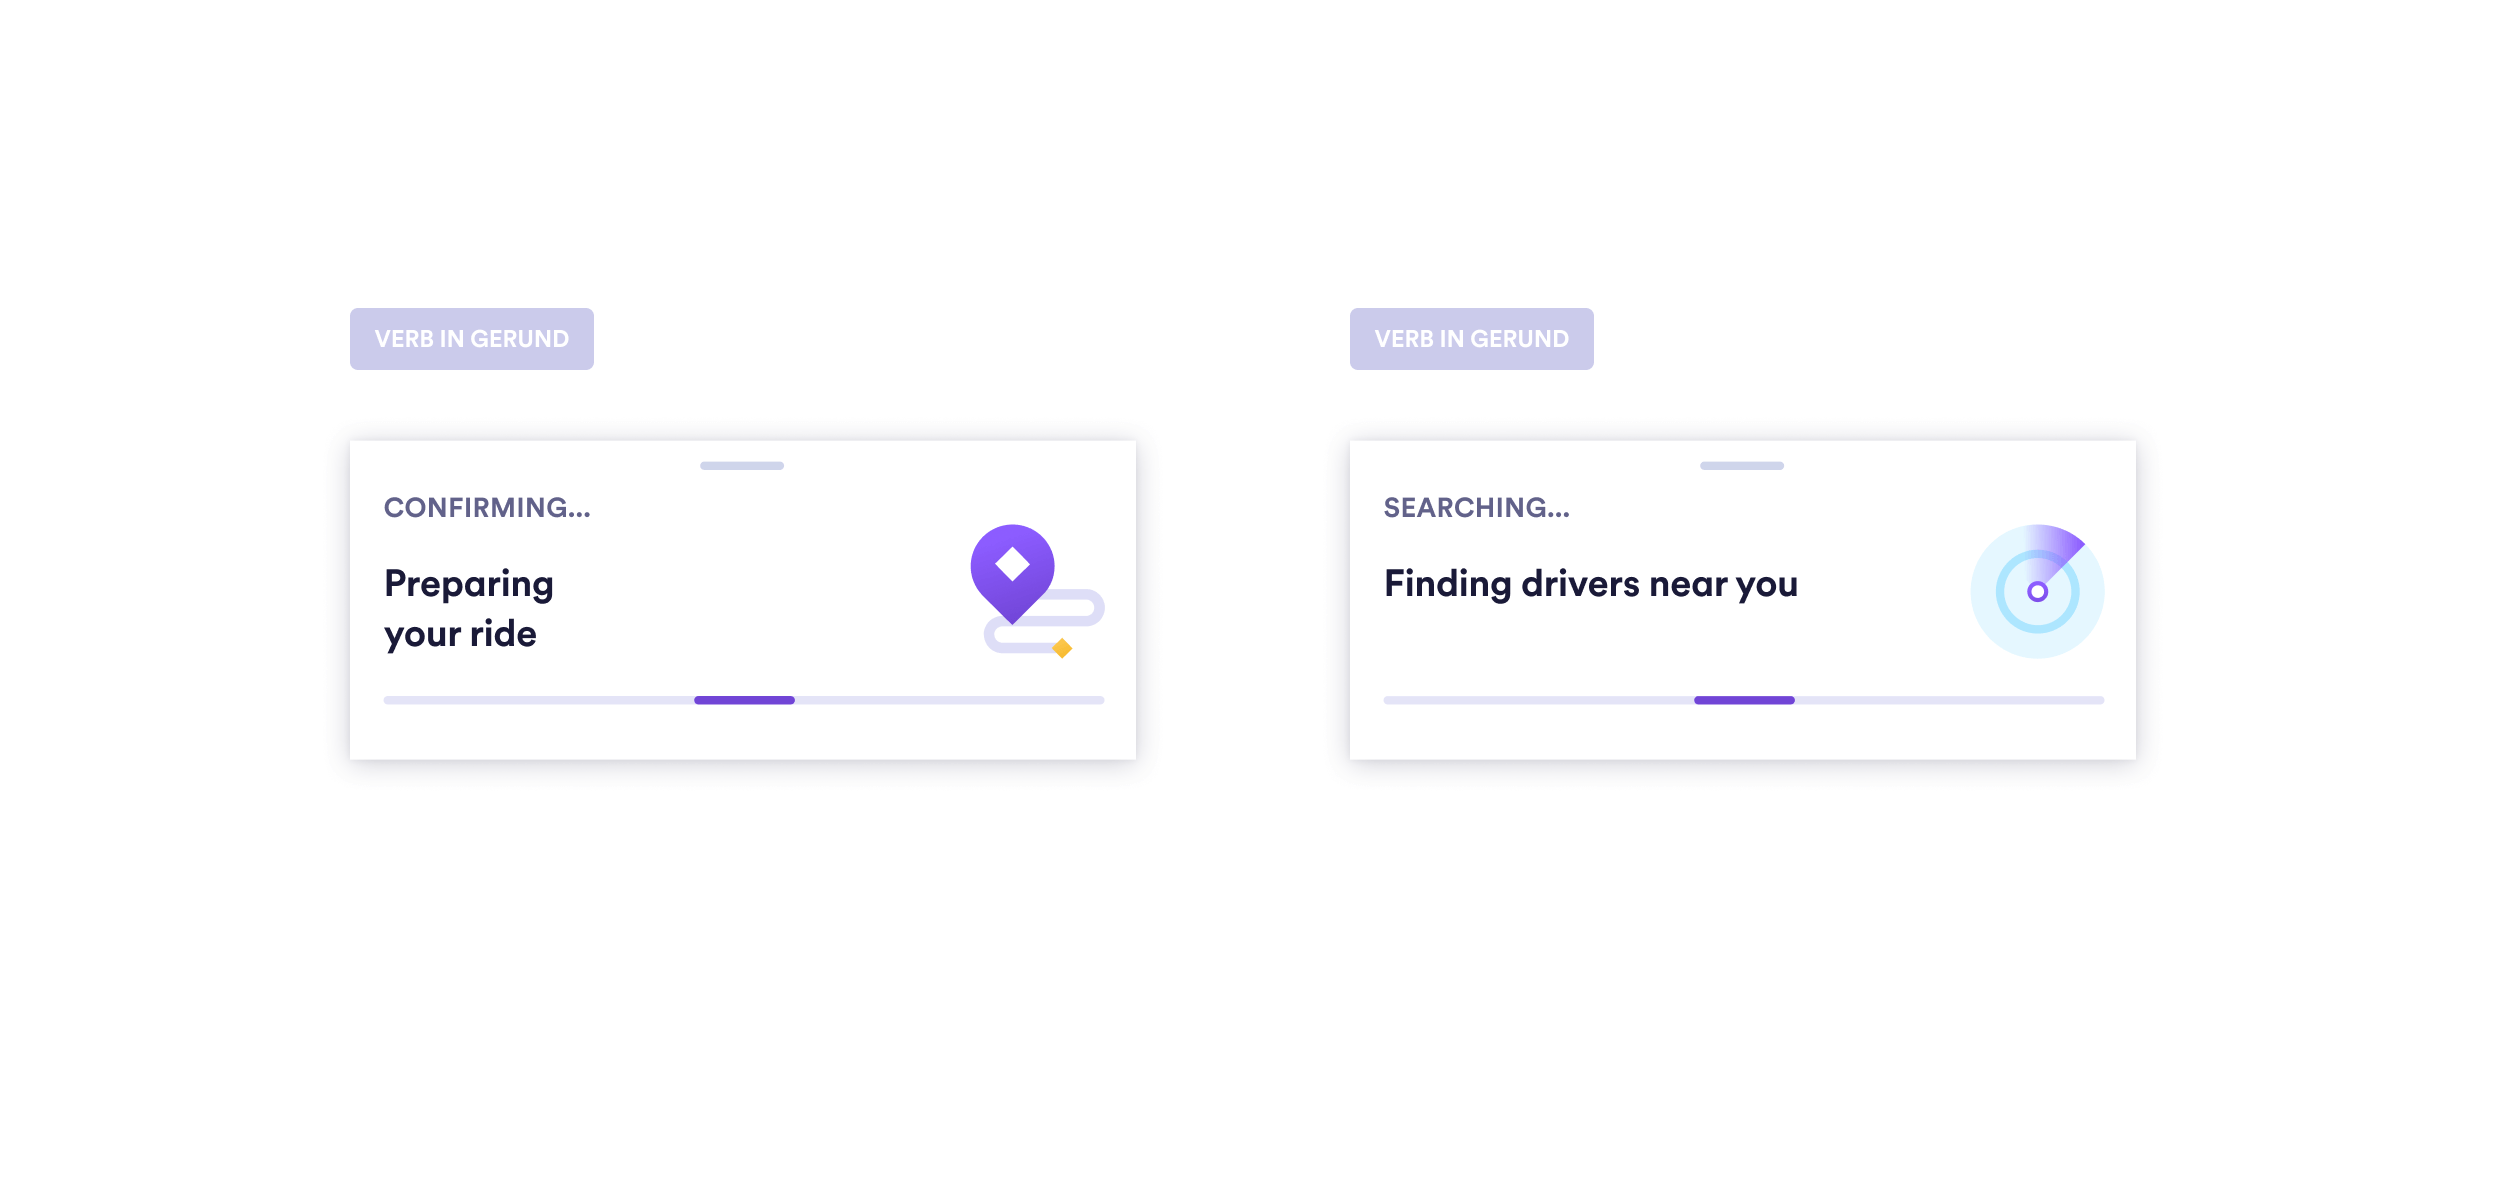 The image consists of two progress bars, referring to the status of a vehicle request. Both boxes have a "Verb in gerund" tag. In the first, we have the text "Confirming… Preparing your ride" and in the second we have the text "Searching… Finding drivers near you".